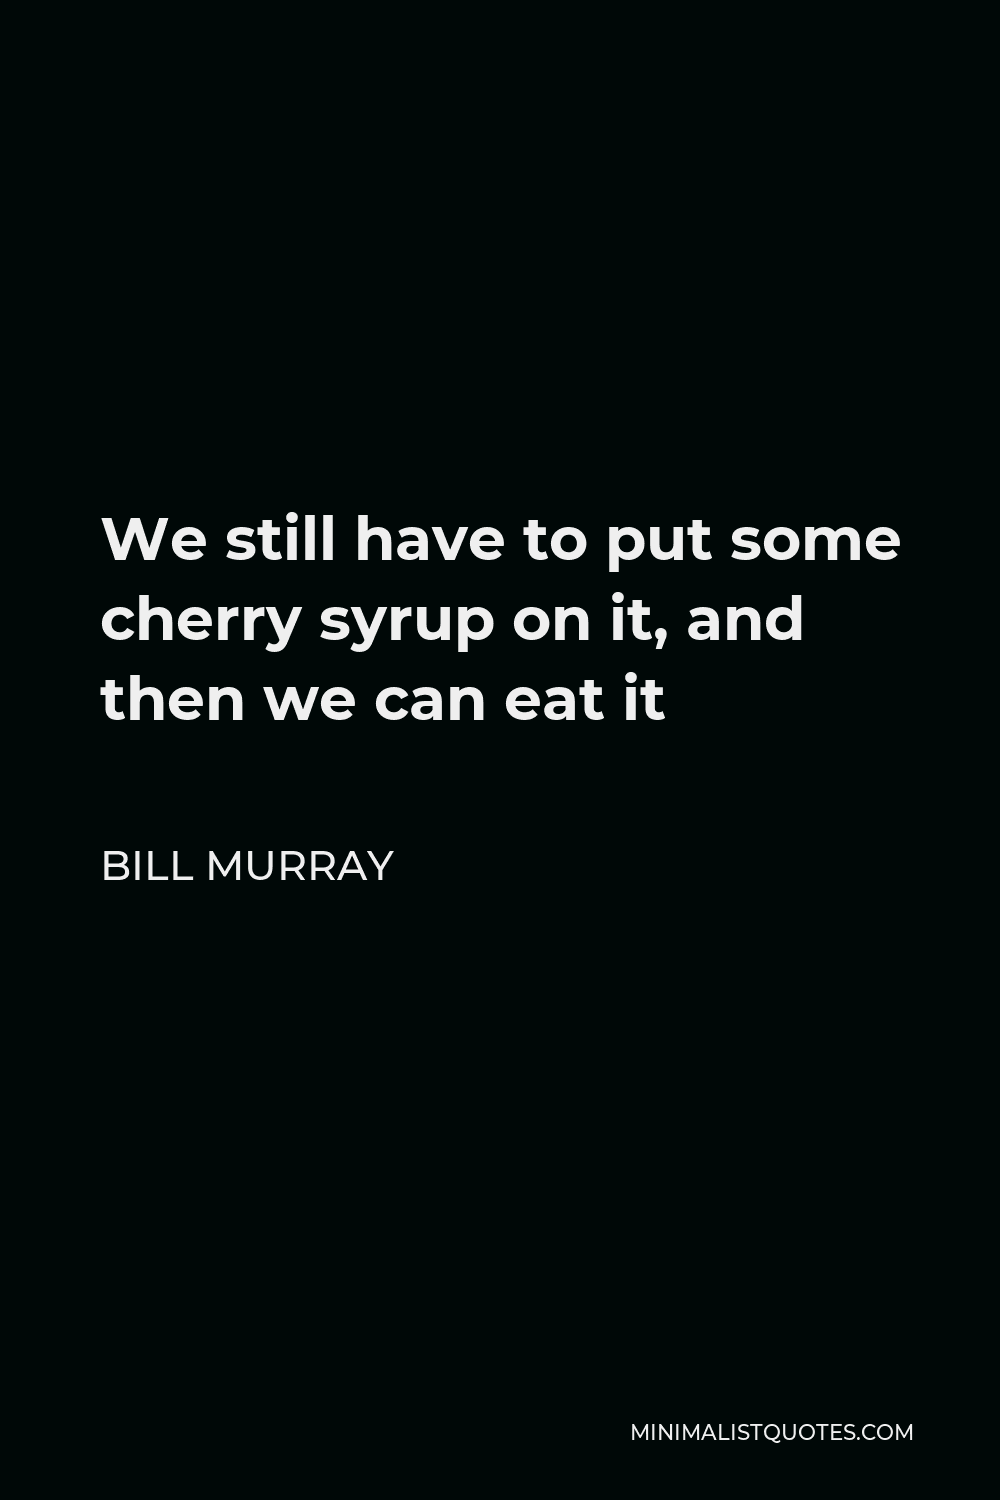 Bill Murray Quote - We still have to put some cherry syrup on it, and then we can eat it